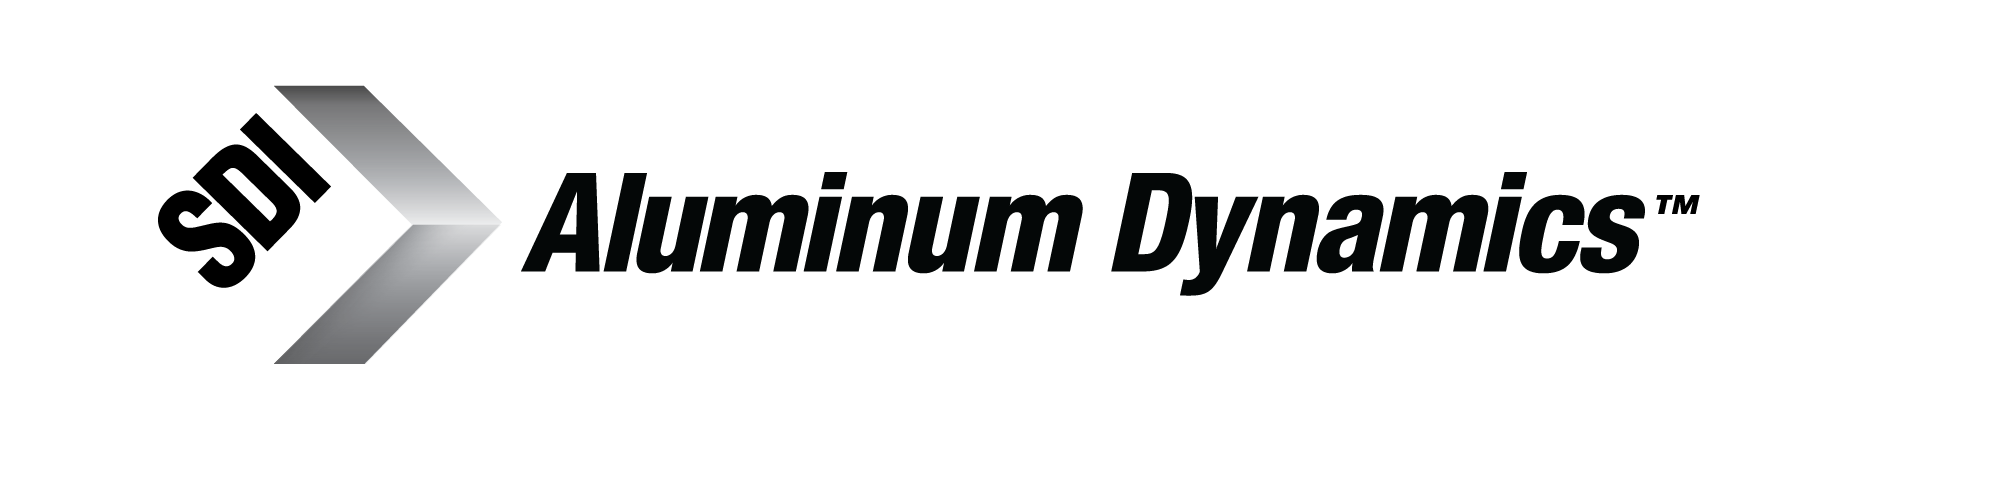 Aluminum Dynamics, owned by Steel Dynamics logo